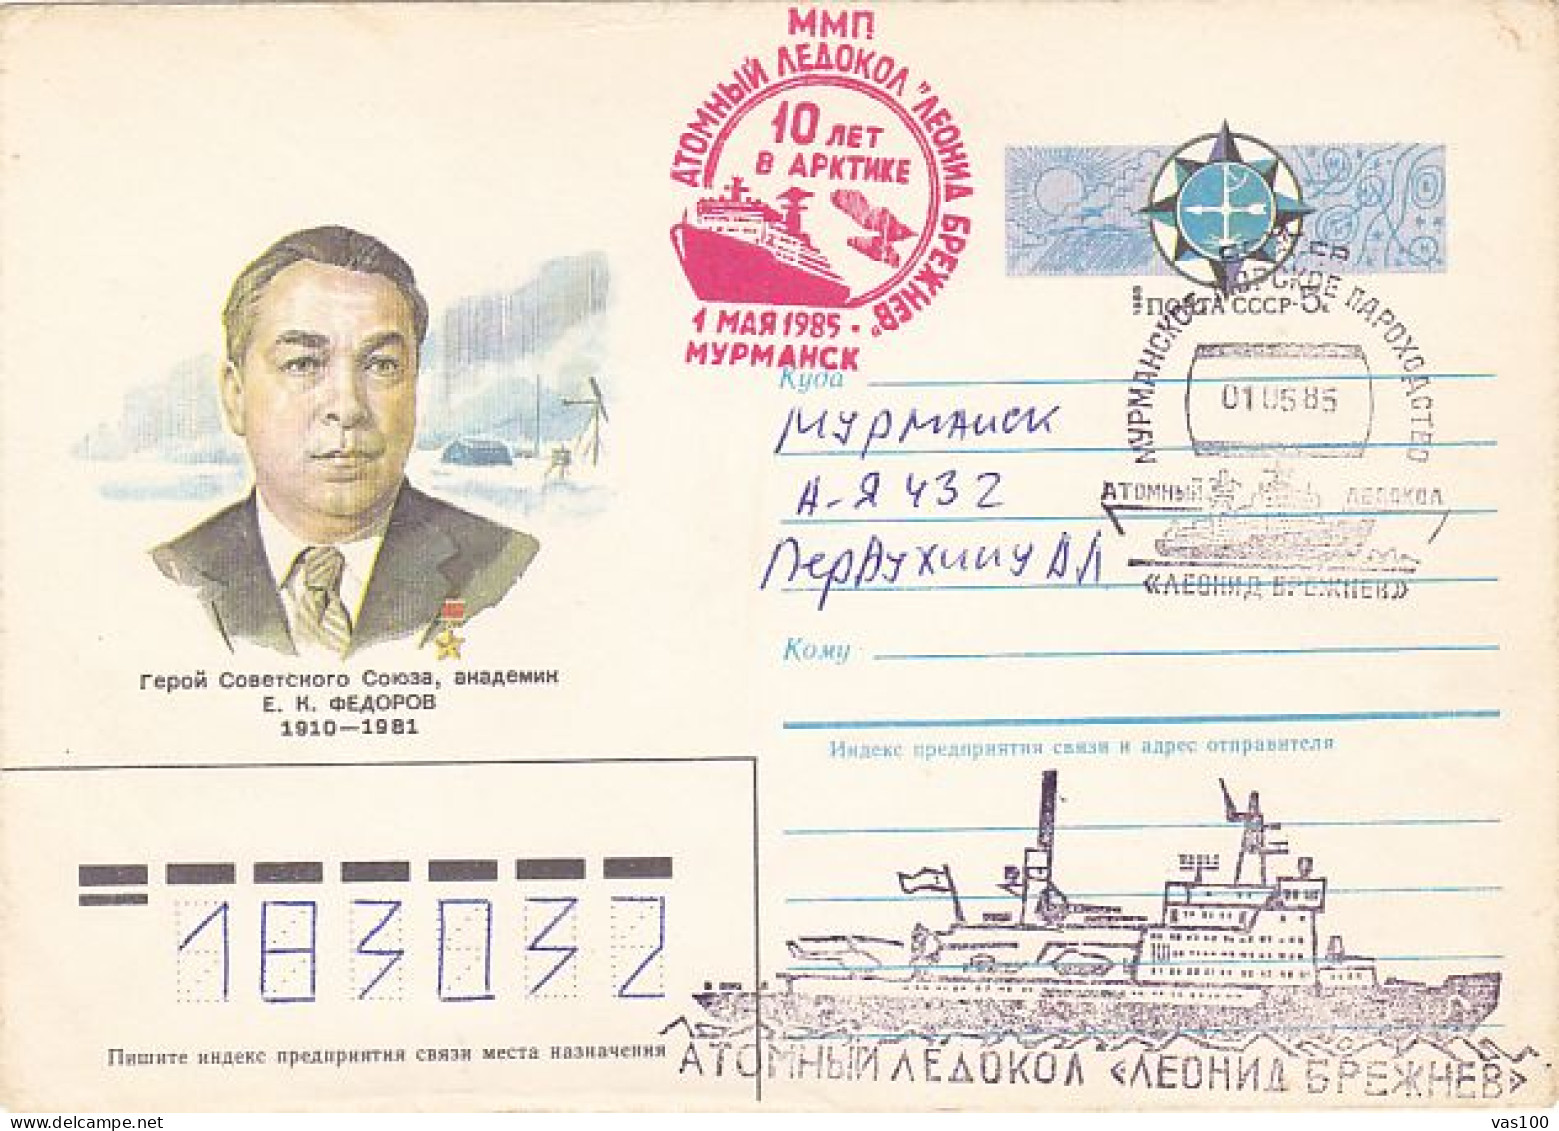 POLAR EXPLORERS, YEVGENY FYODOROV, SHIP, ICE BREAKER SPECIAL POSTMARK, COVER STATIONERY, ENTIER POSTAL, 1985, RUSSIA - Polar Explorers & Famous People